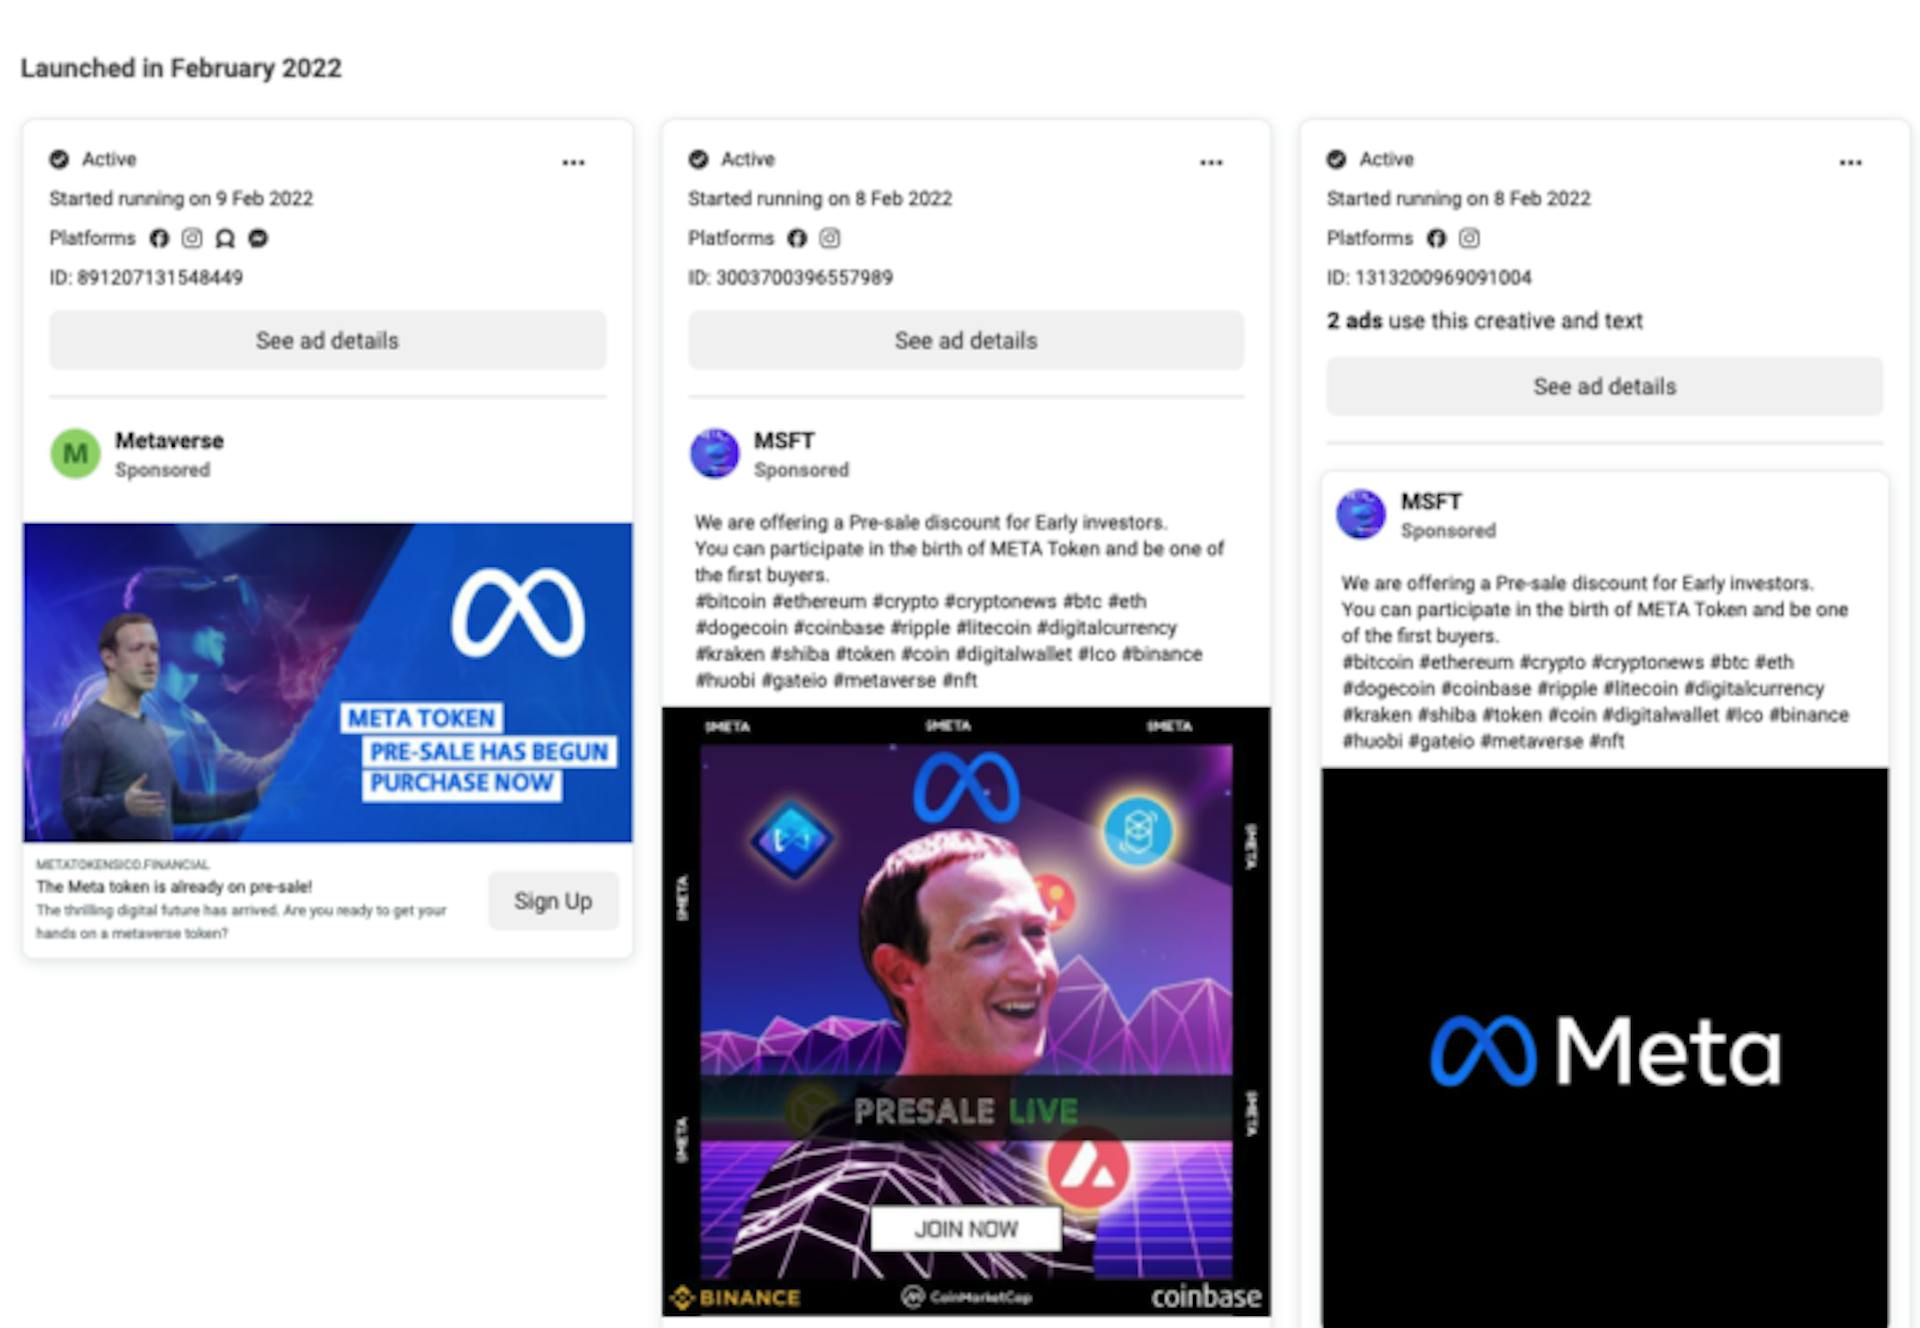 These Facebook ads ran in February 2022; all feature Meta’s infinity symbol logo and/or Mark Zuckerberg’s image. Credit: Facebook